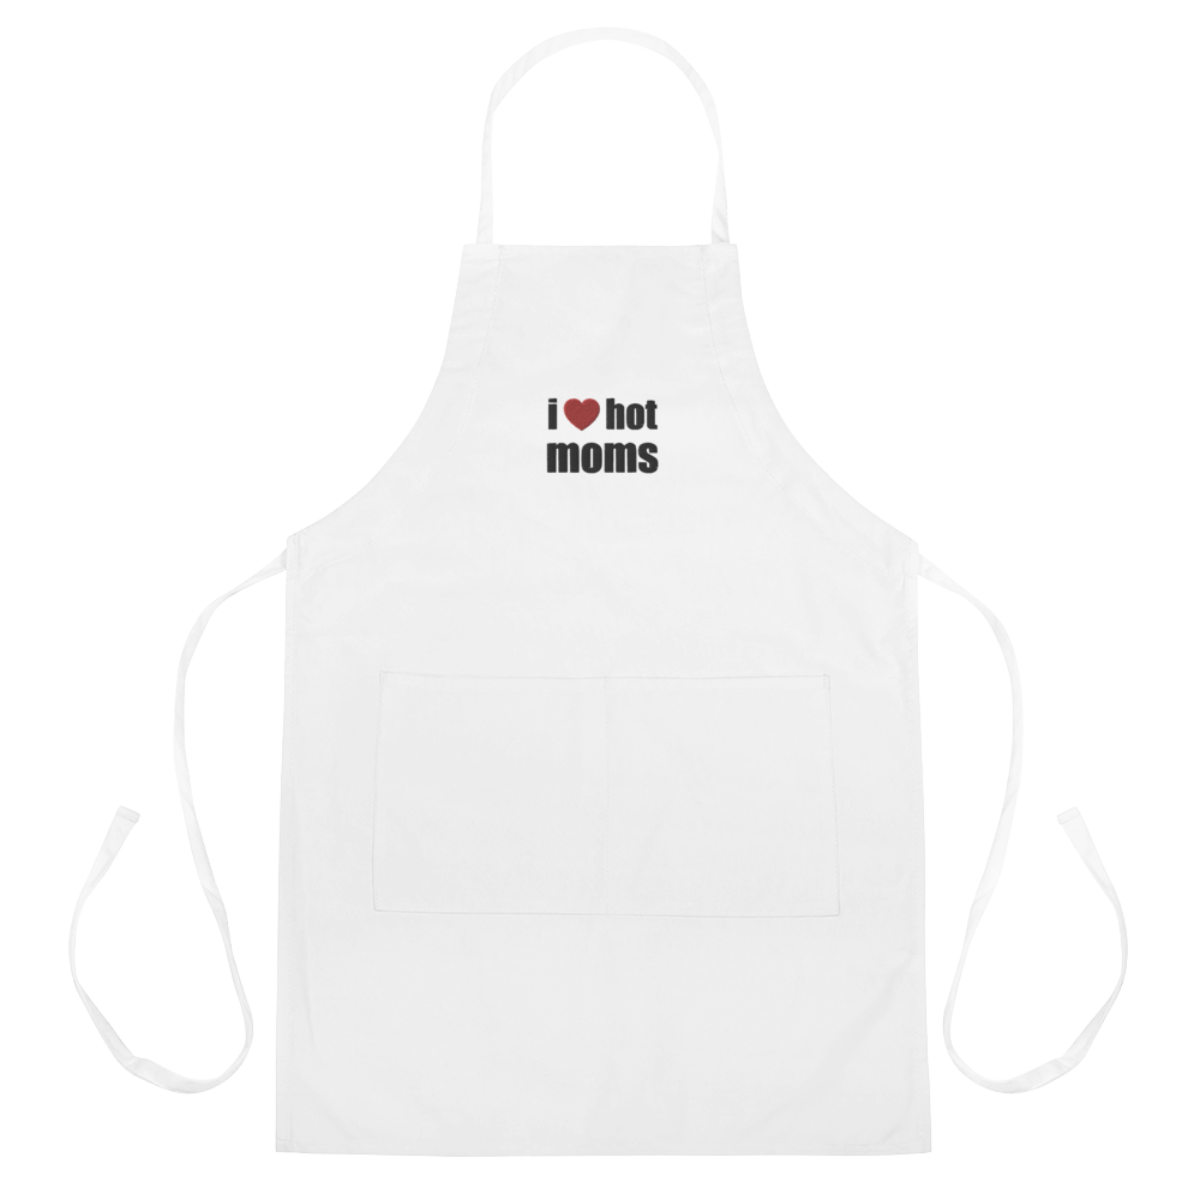 https://cdn.ilovehotmoms.shop/wp-content/uploads/2021/04/embroidered-apron-white-front-608afa6901af0-1200x1200.png